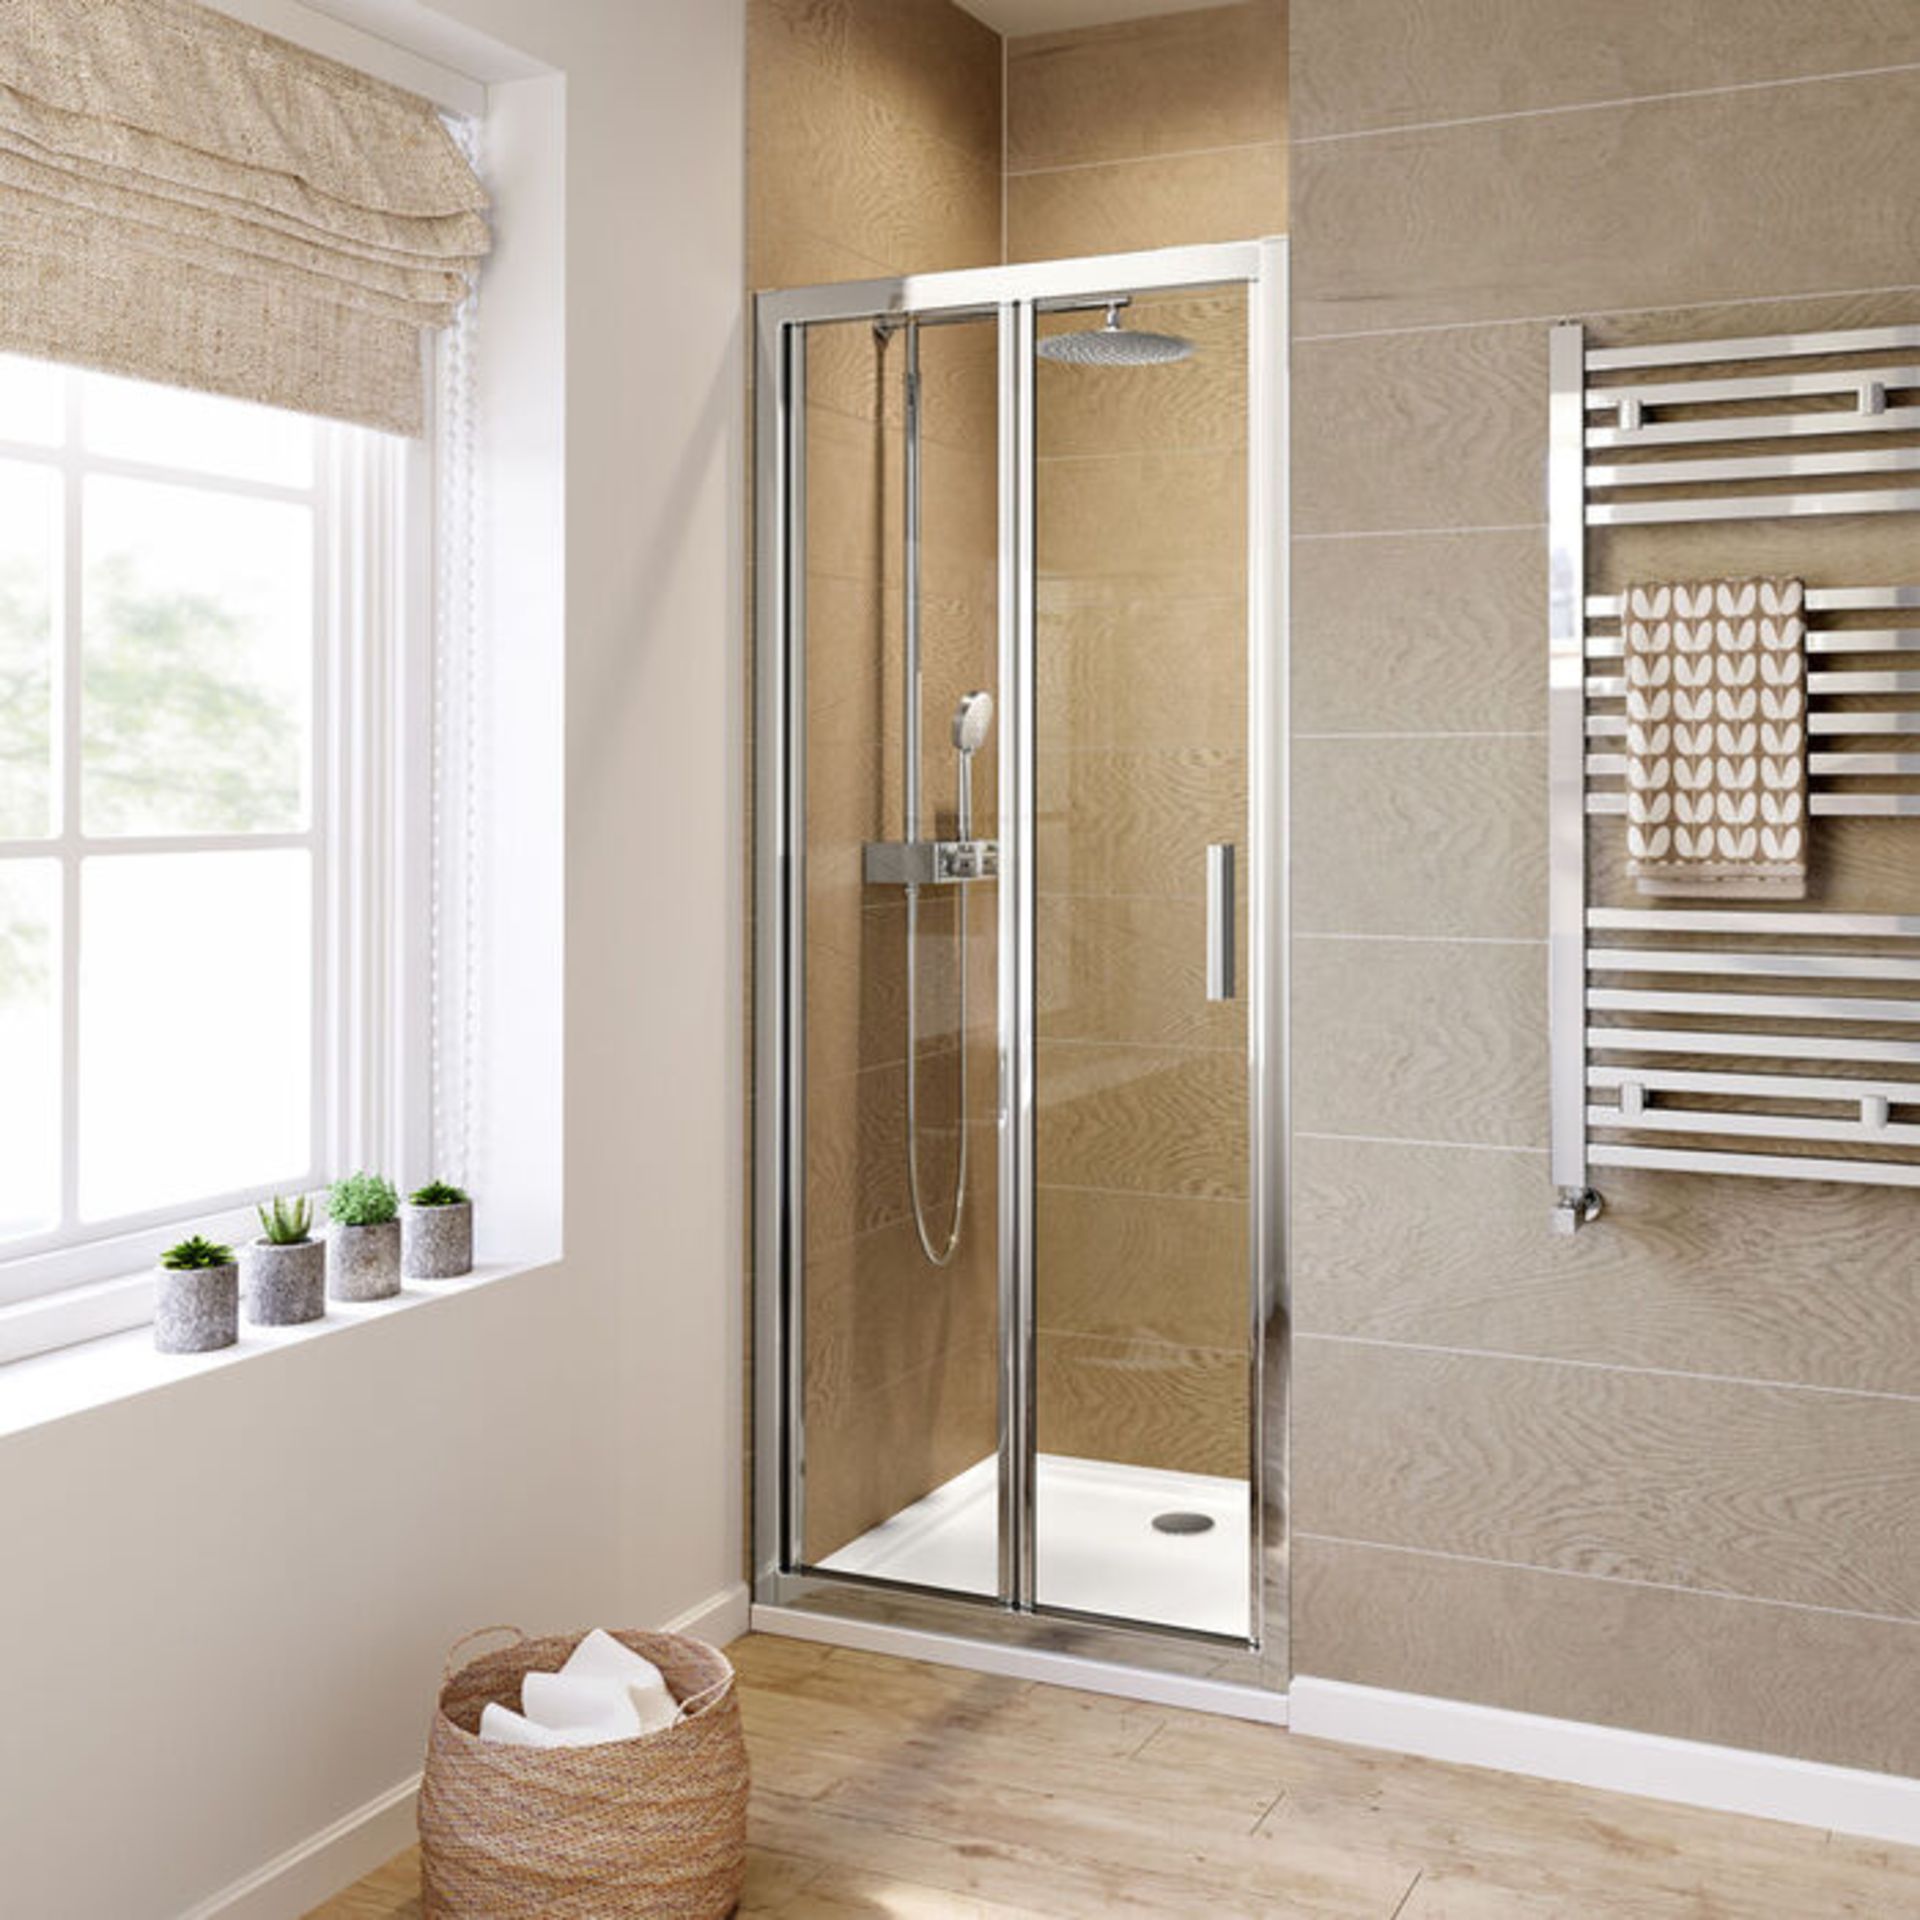 (DD37) 900mm - 6mm - Elements EasyClean Bifold Shower Door. RRP £299.99. 6mm Safety Glass - Si... - Image 2 of 3